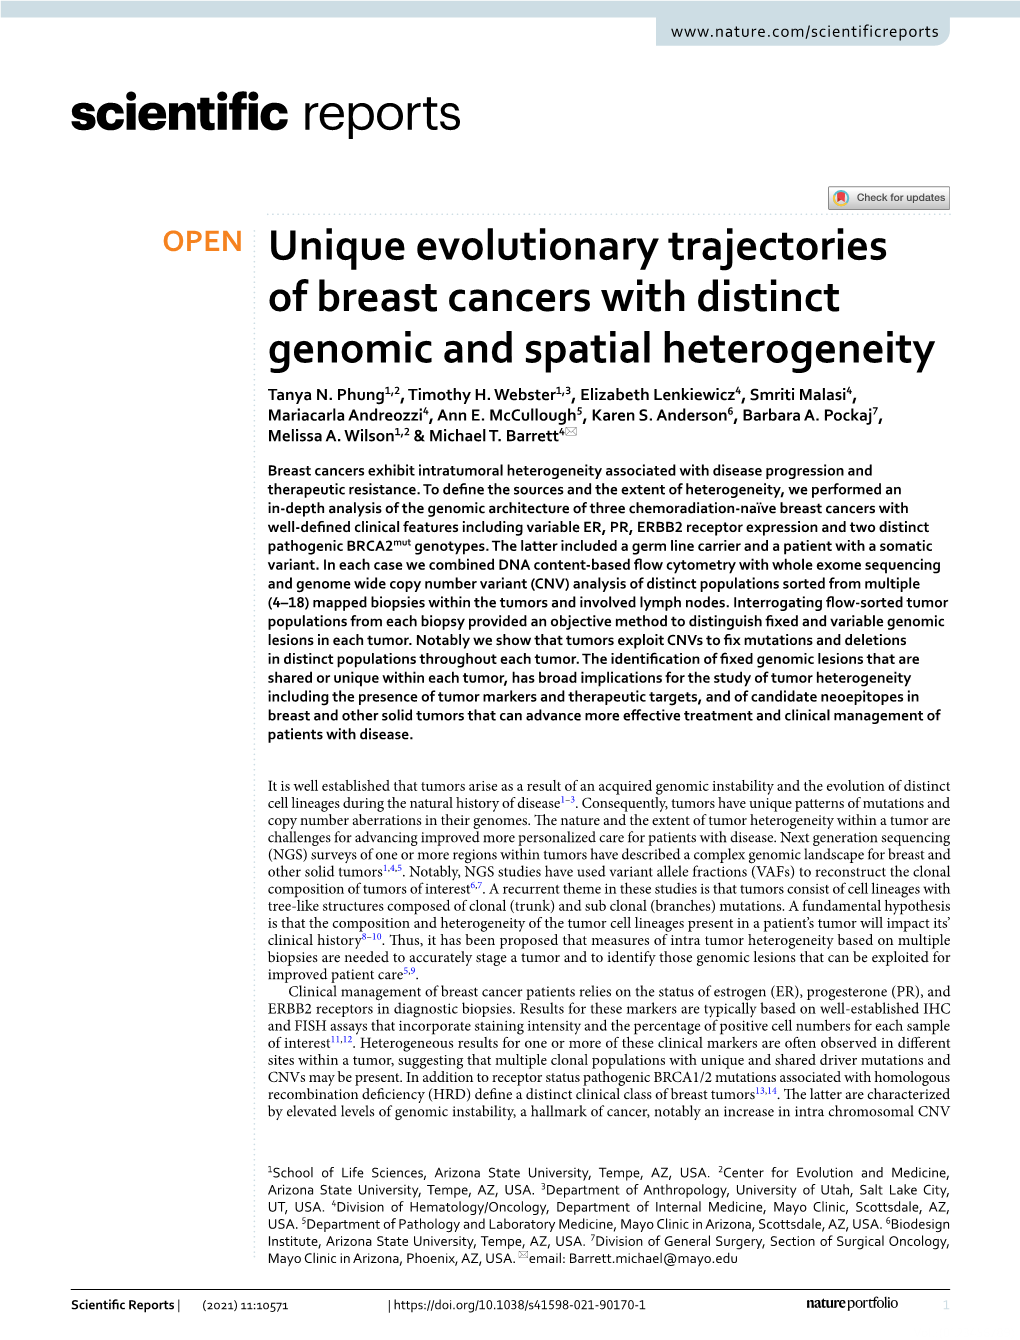 Unique Evolutionary Trajectories of Breast Cancers with Distinct Genomic and Spatial Heterogeneity Tanya N